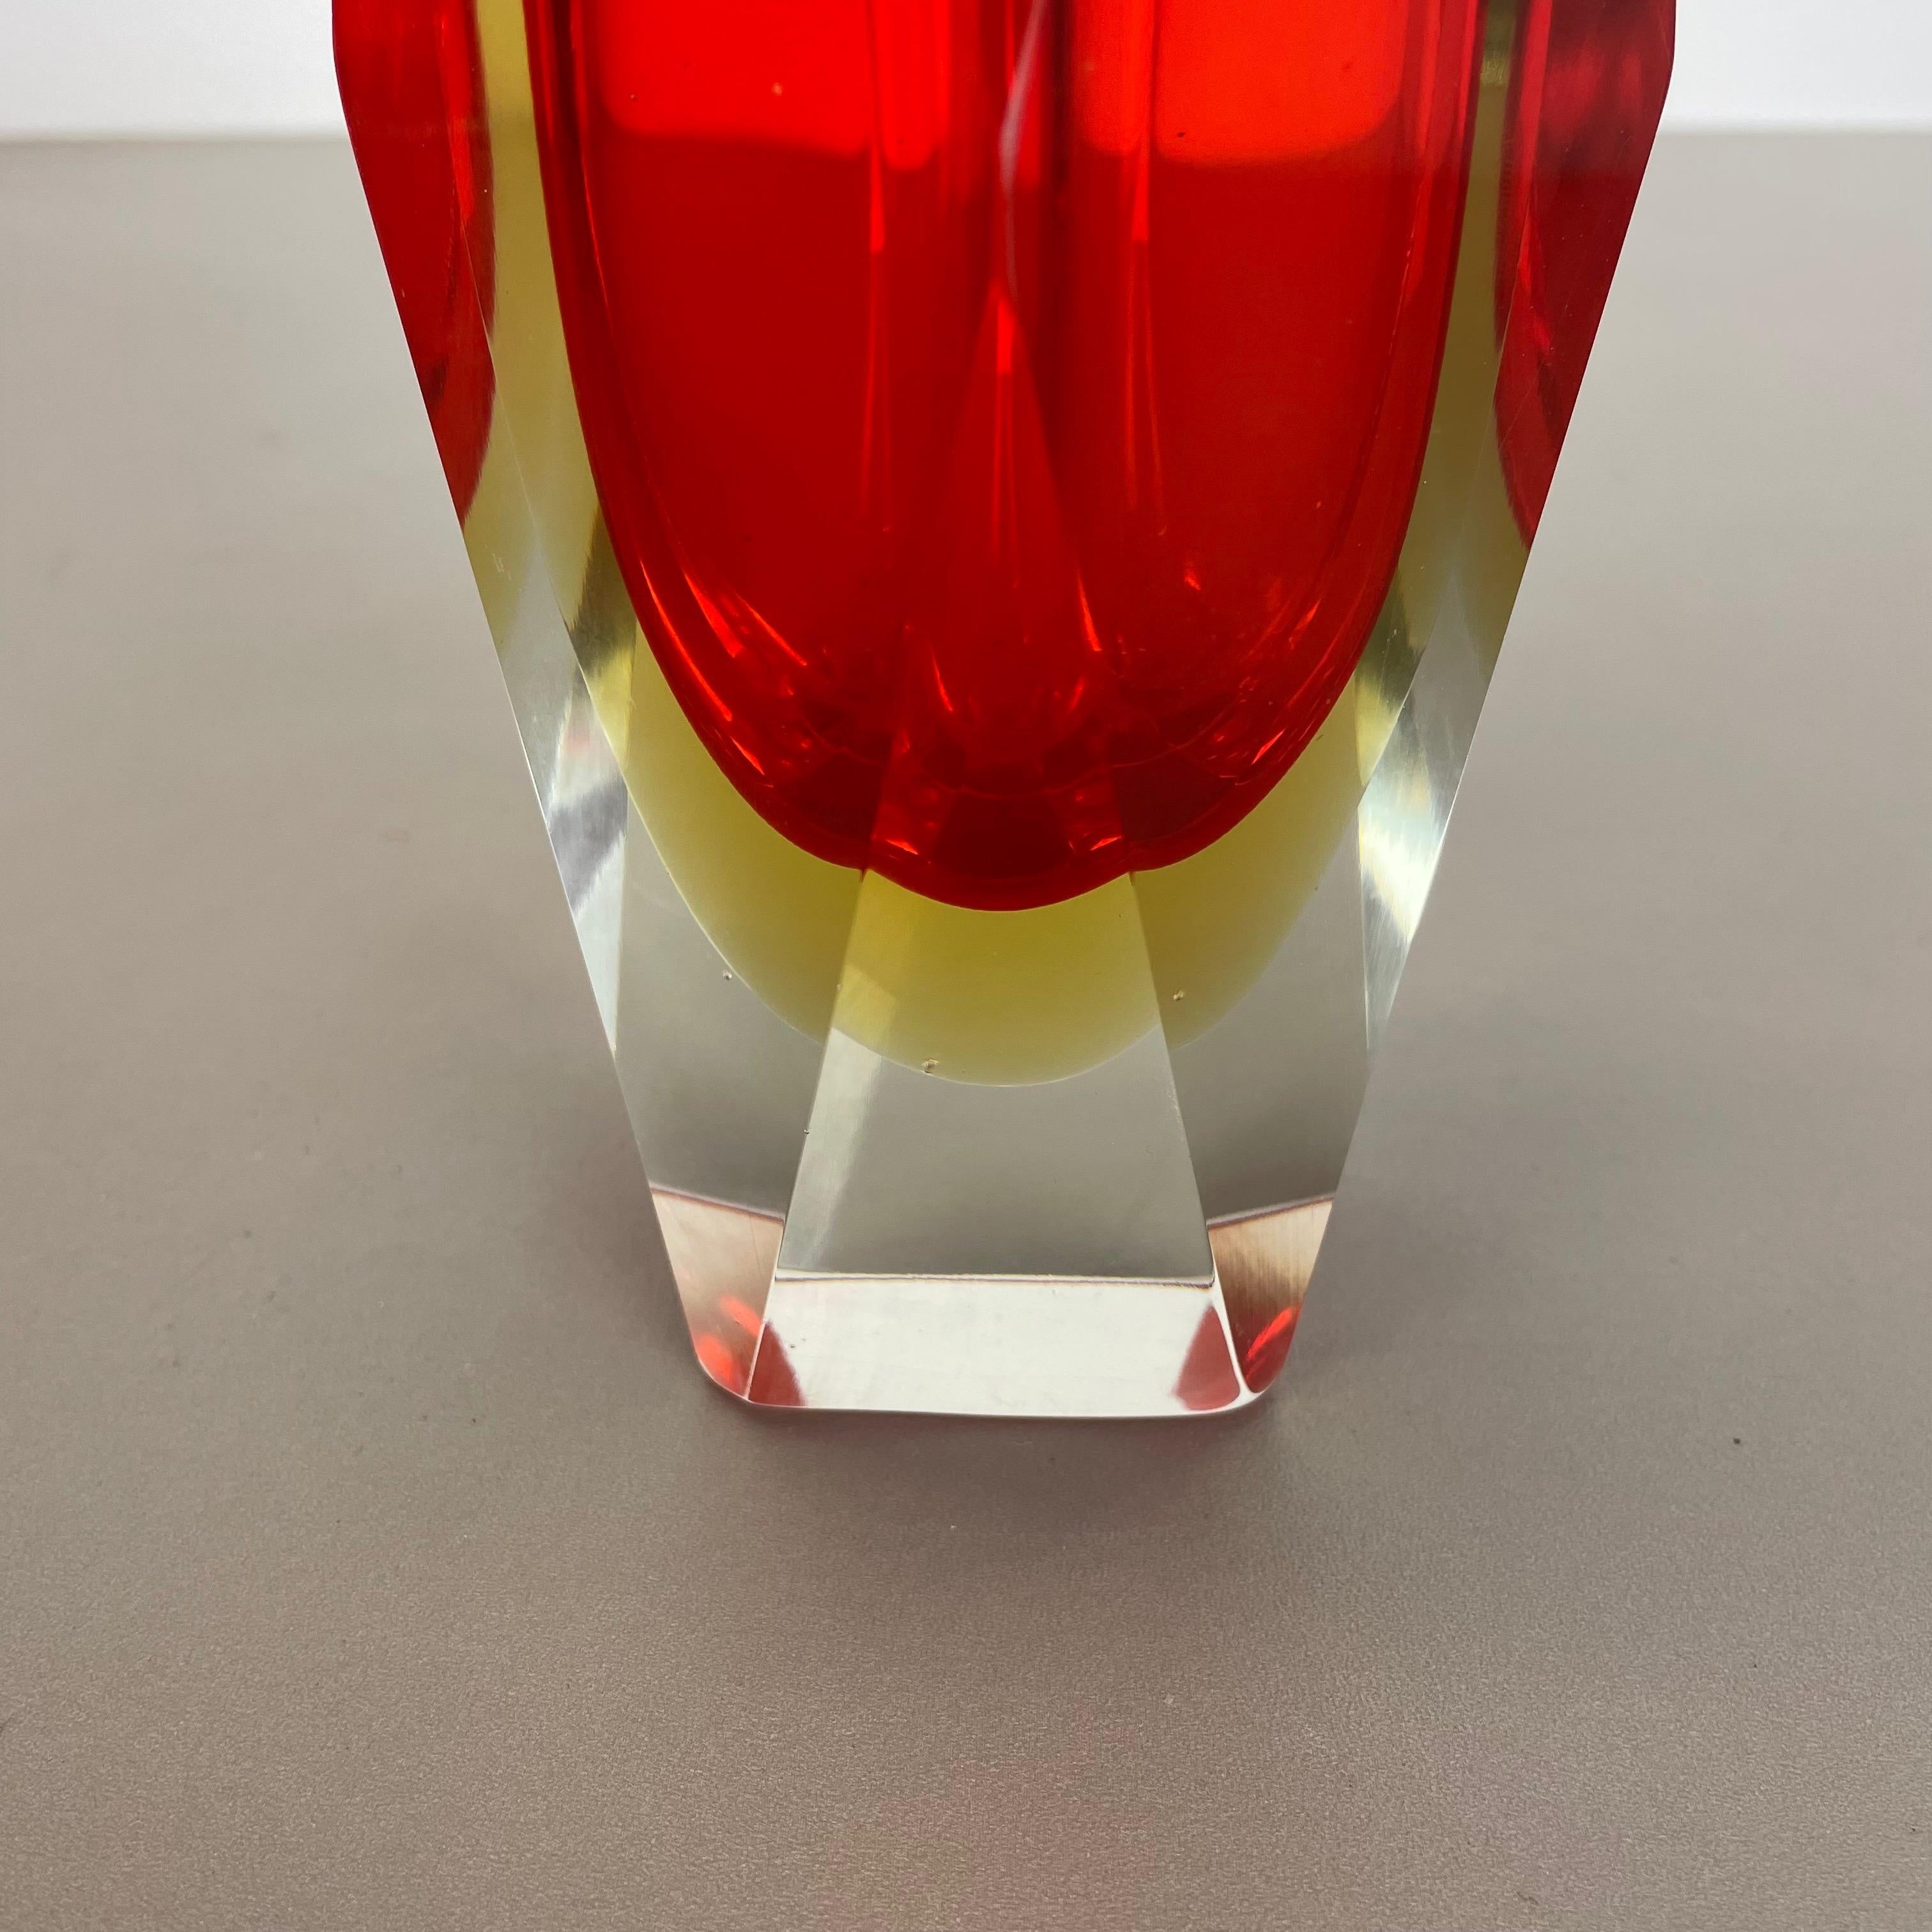 Large Red Murano Glass Sommerso Vase by Flavio Poli Attributed, Italy 1970s For Sale 2